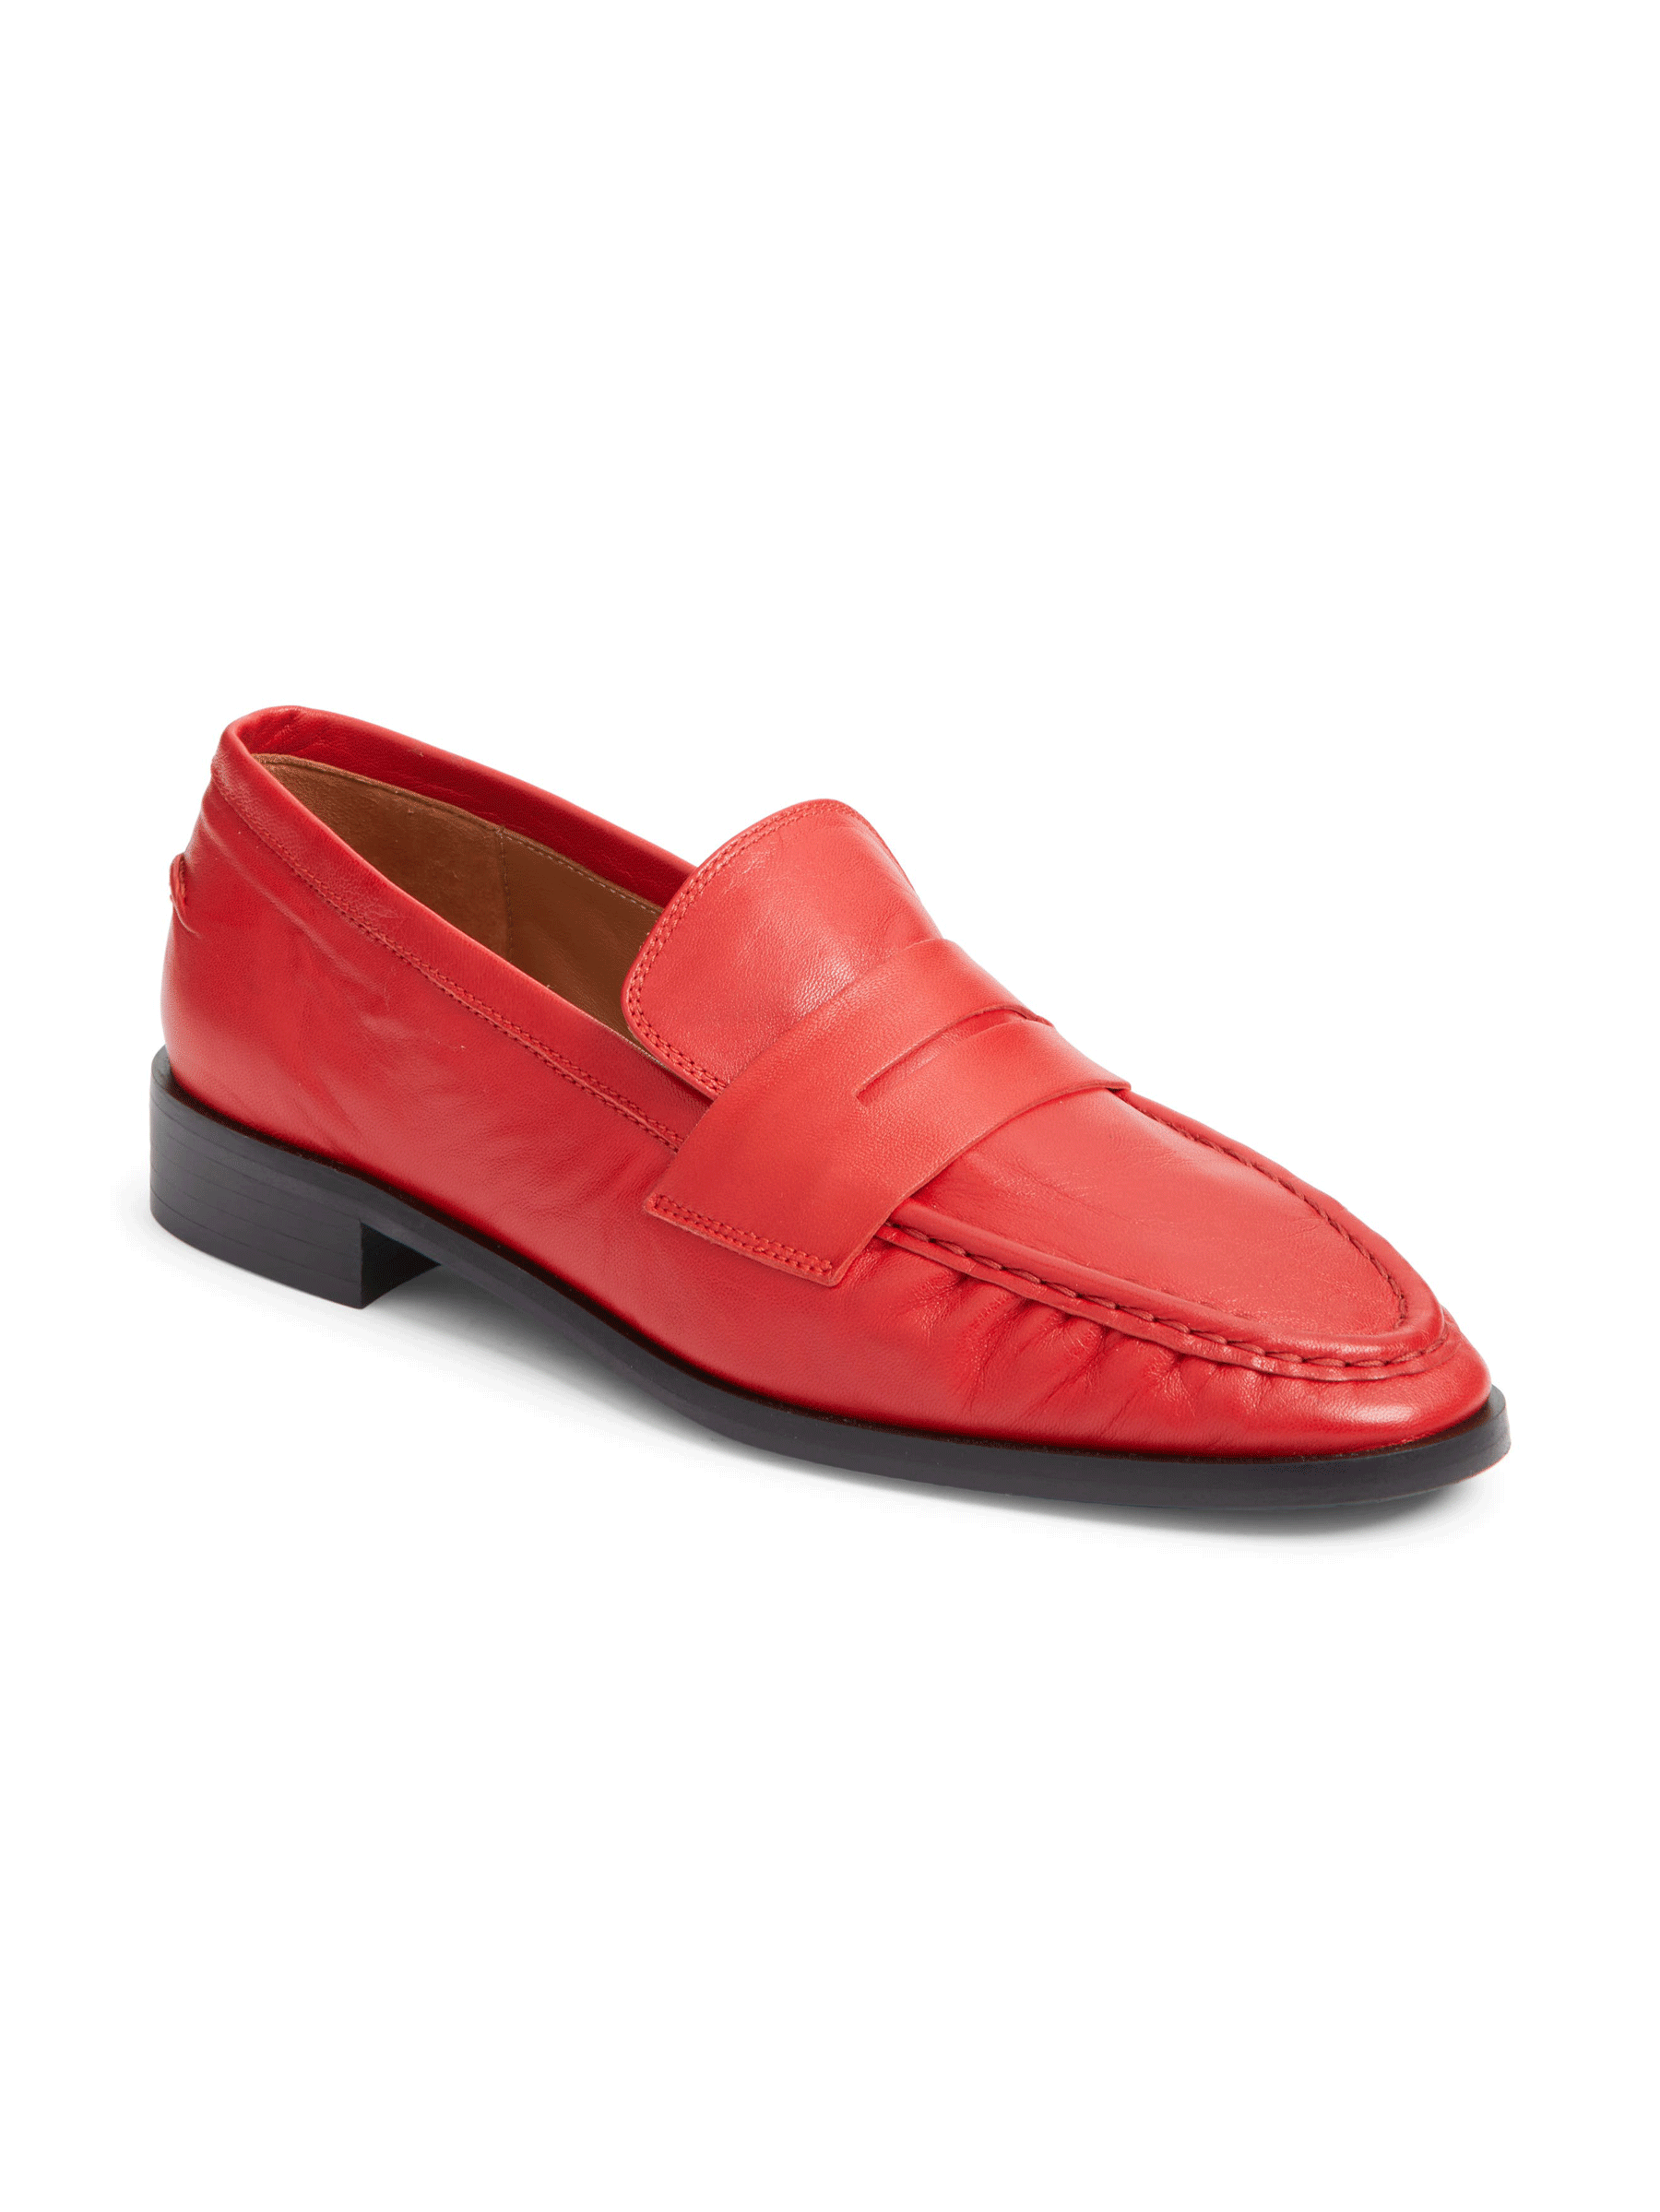 ATP Atelier + Airola Penny Loafers